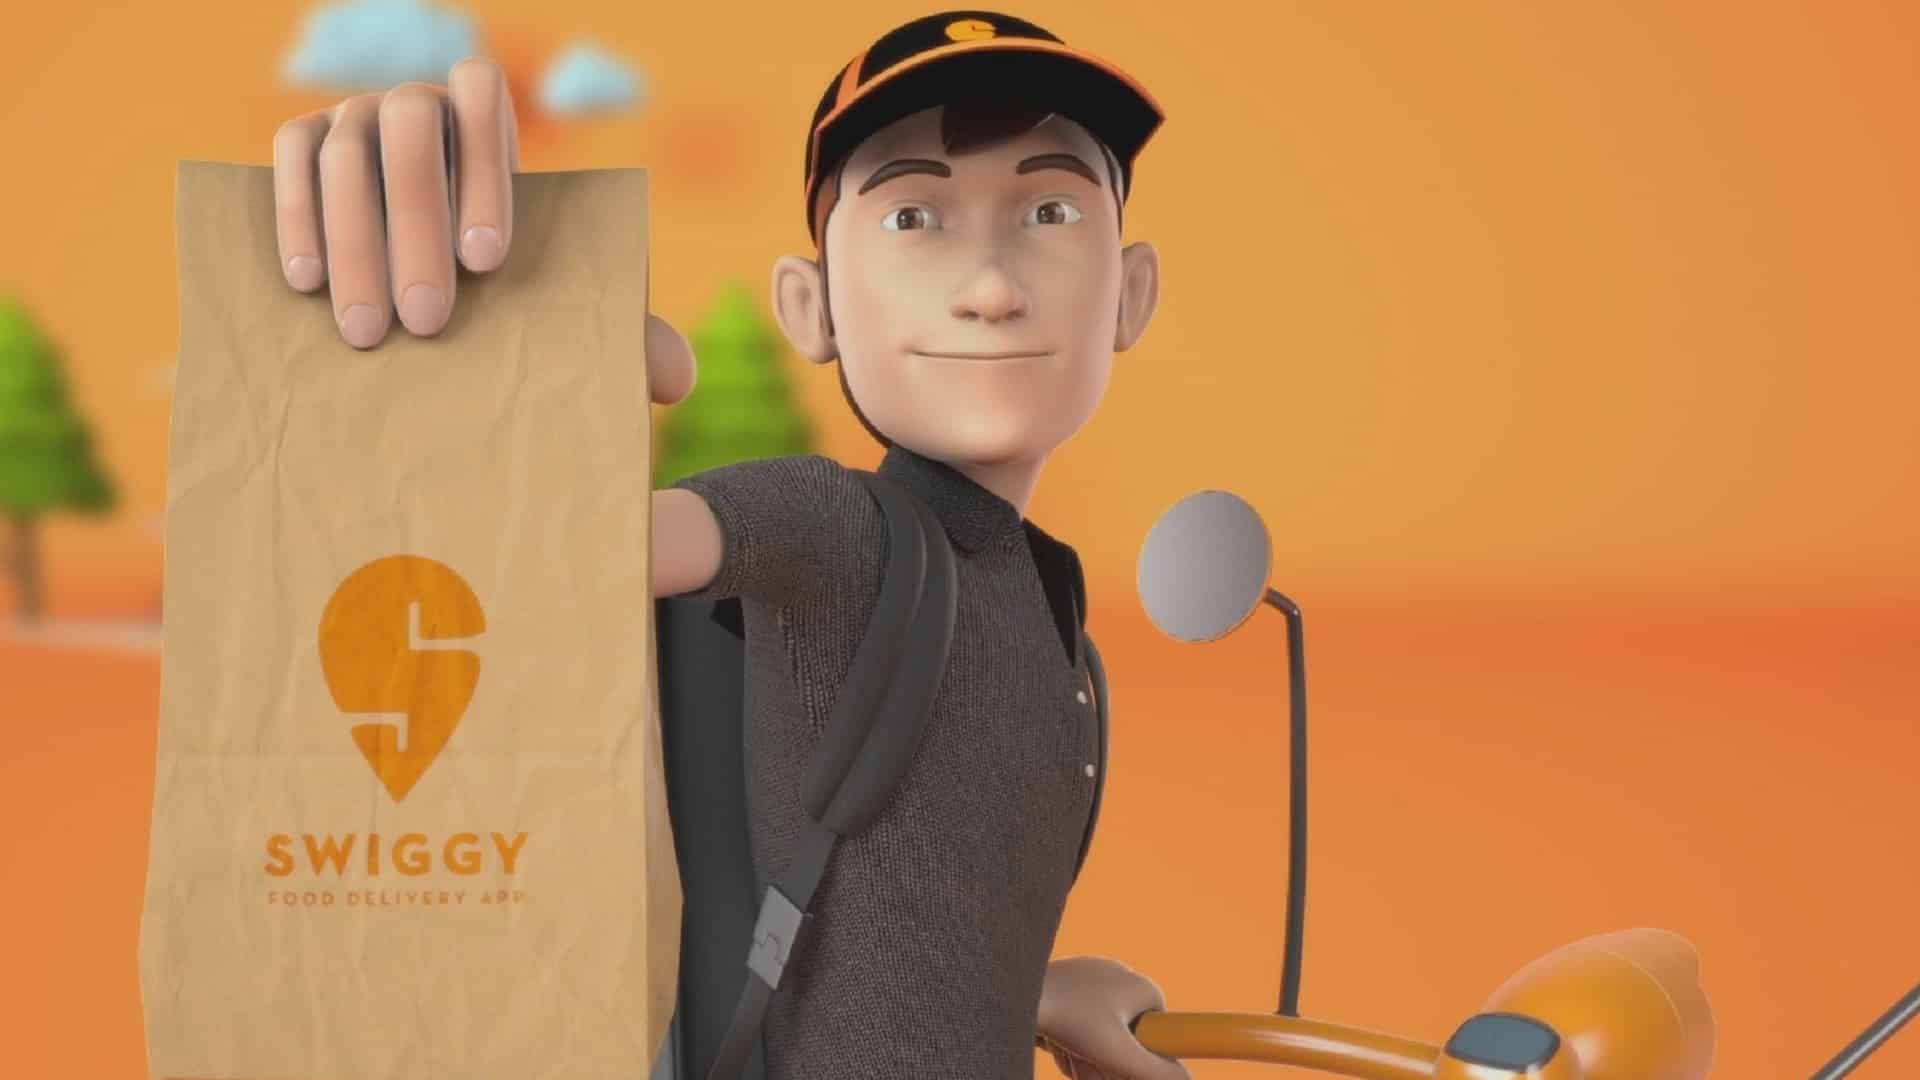 Swiggy lays off 380 employees; CEO Majety says overhiring 'poor judgement'